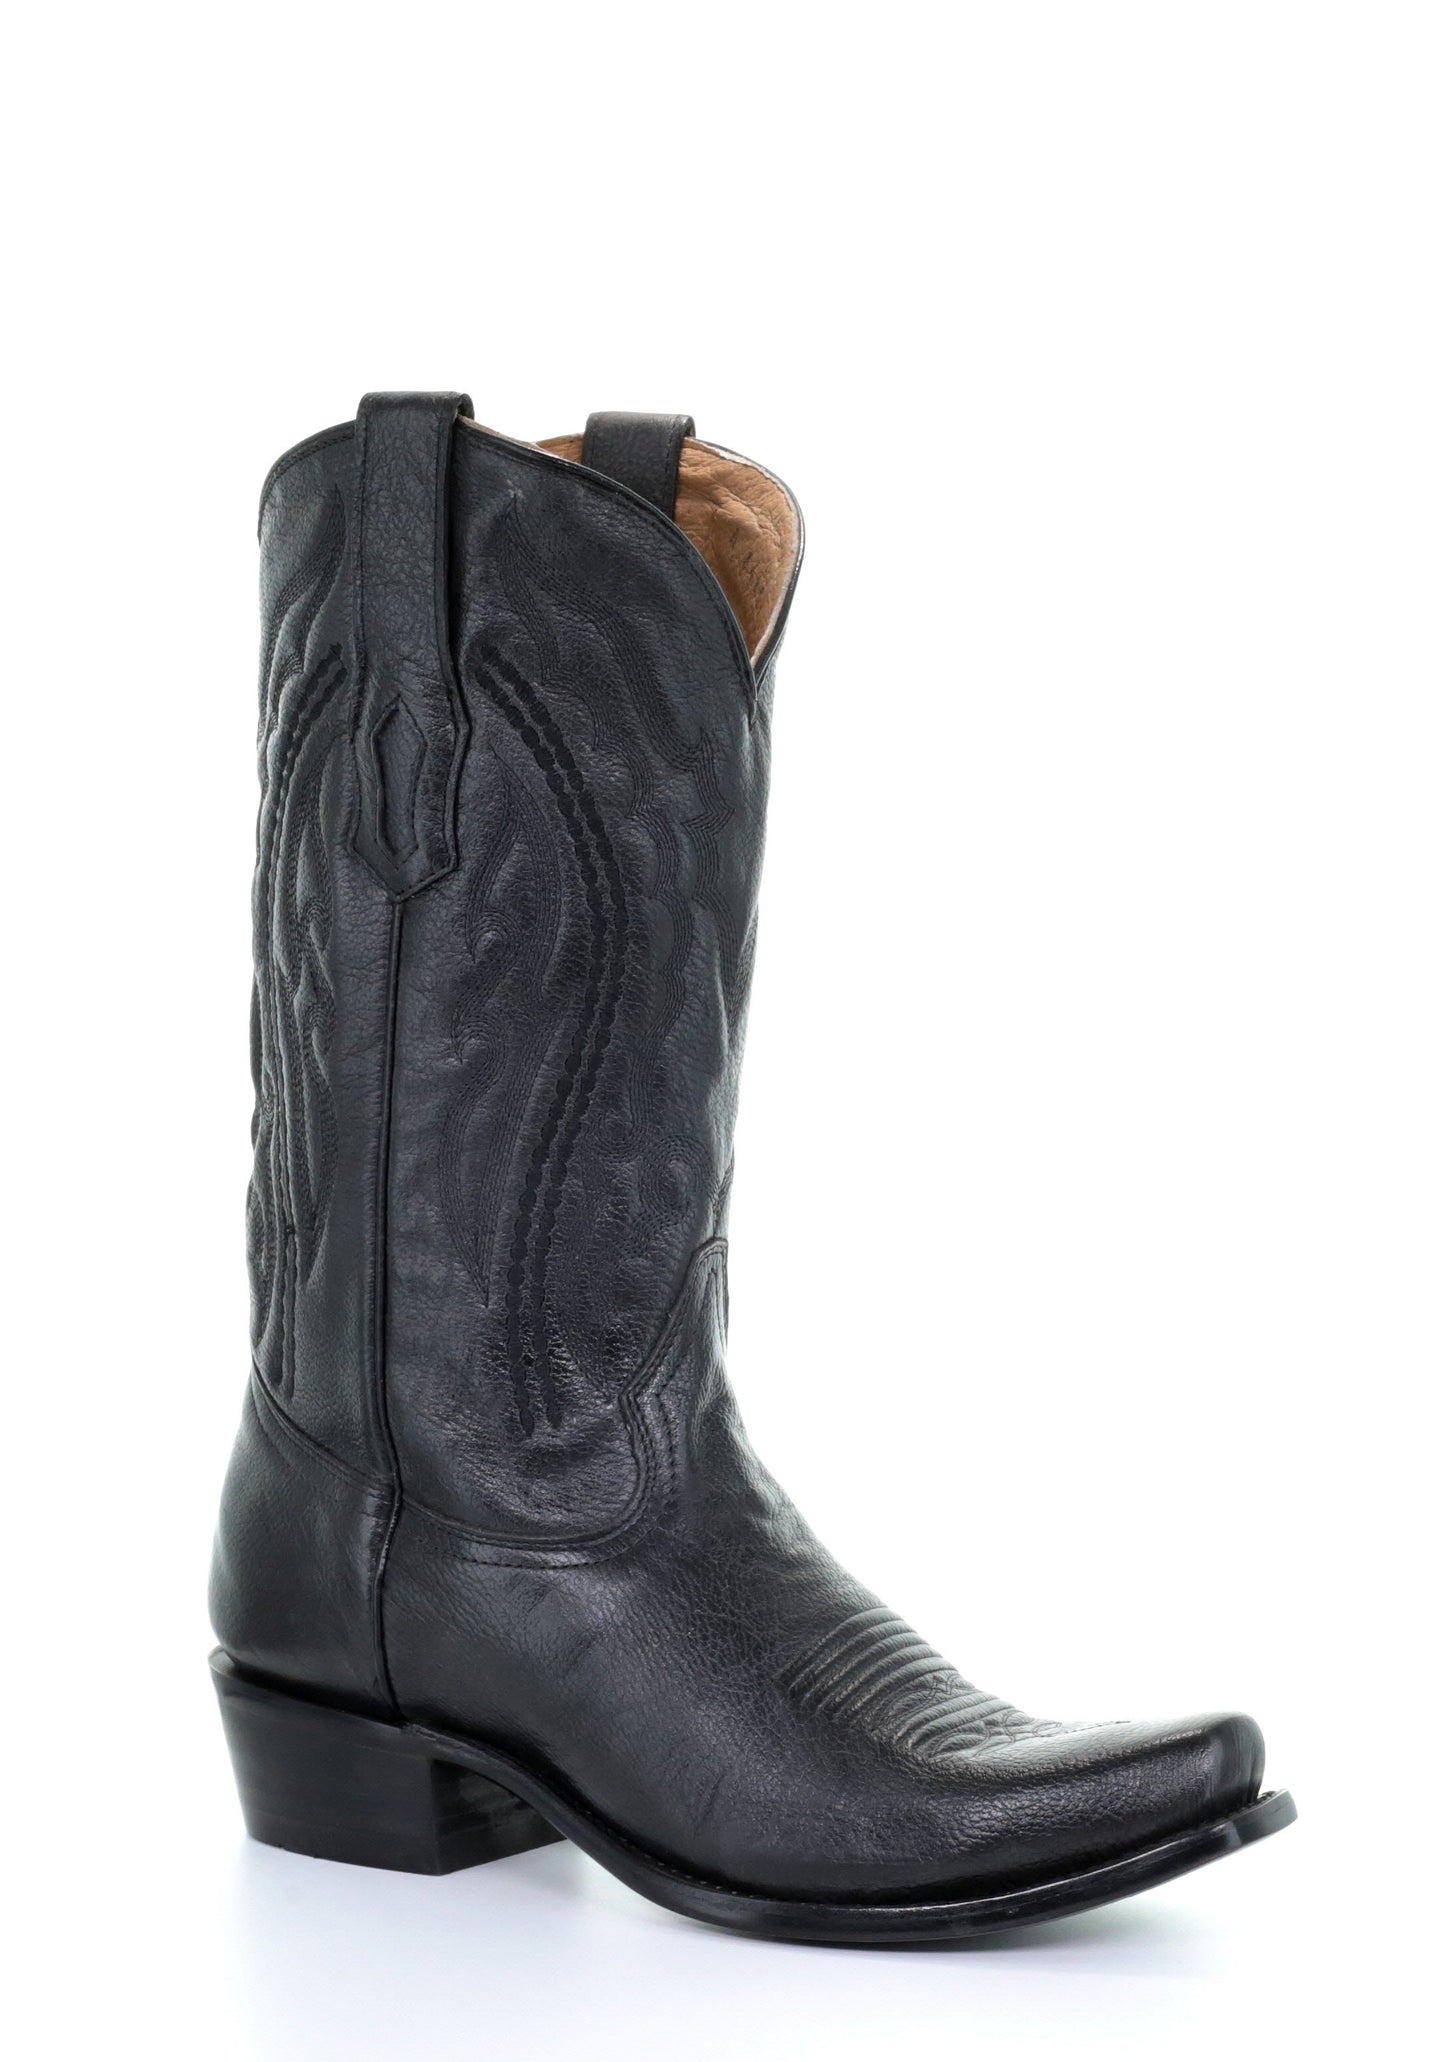 Corral Men's Black Embroidery Narrow Square Toe Cowboy Boots - A3446